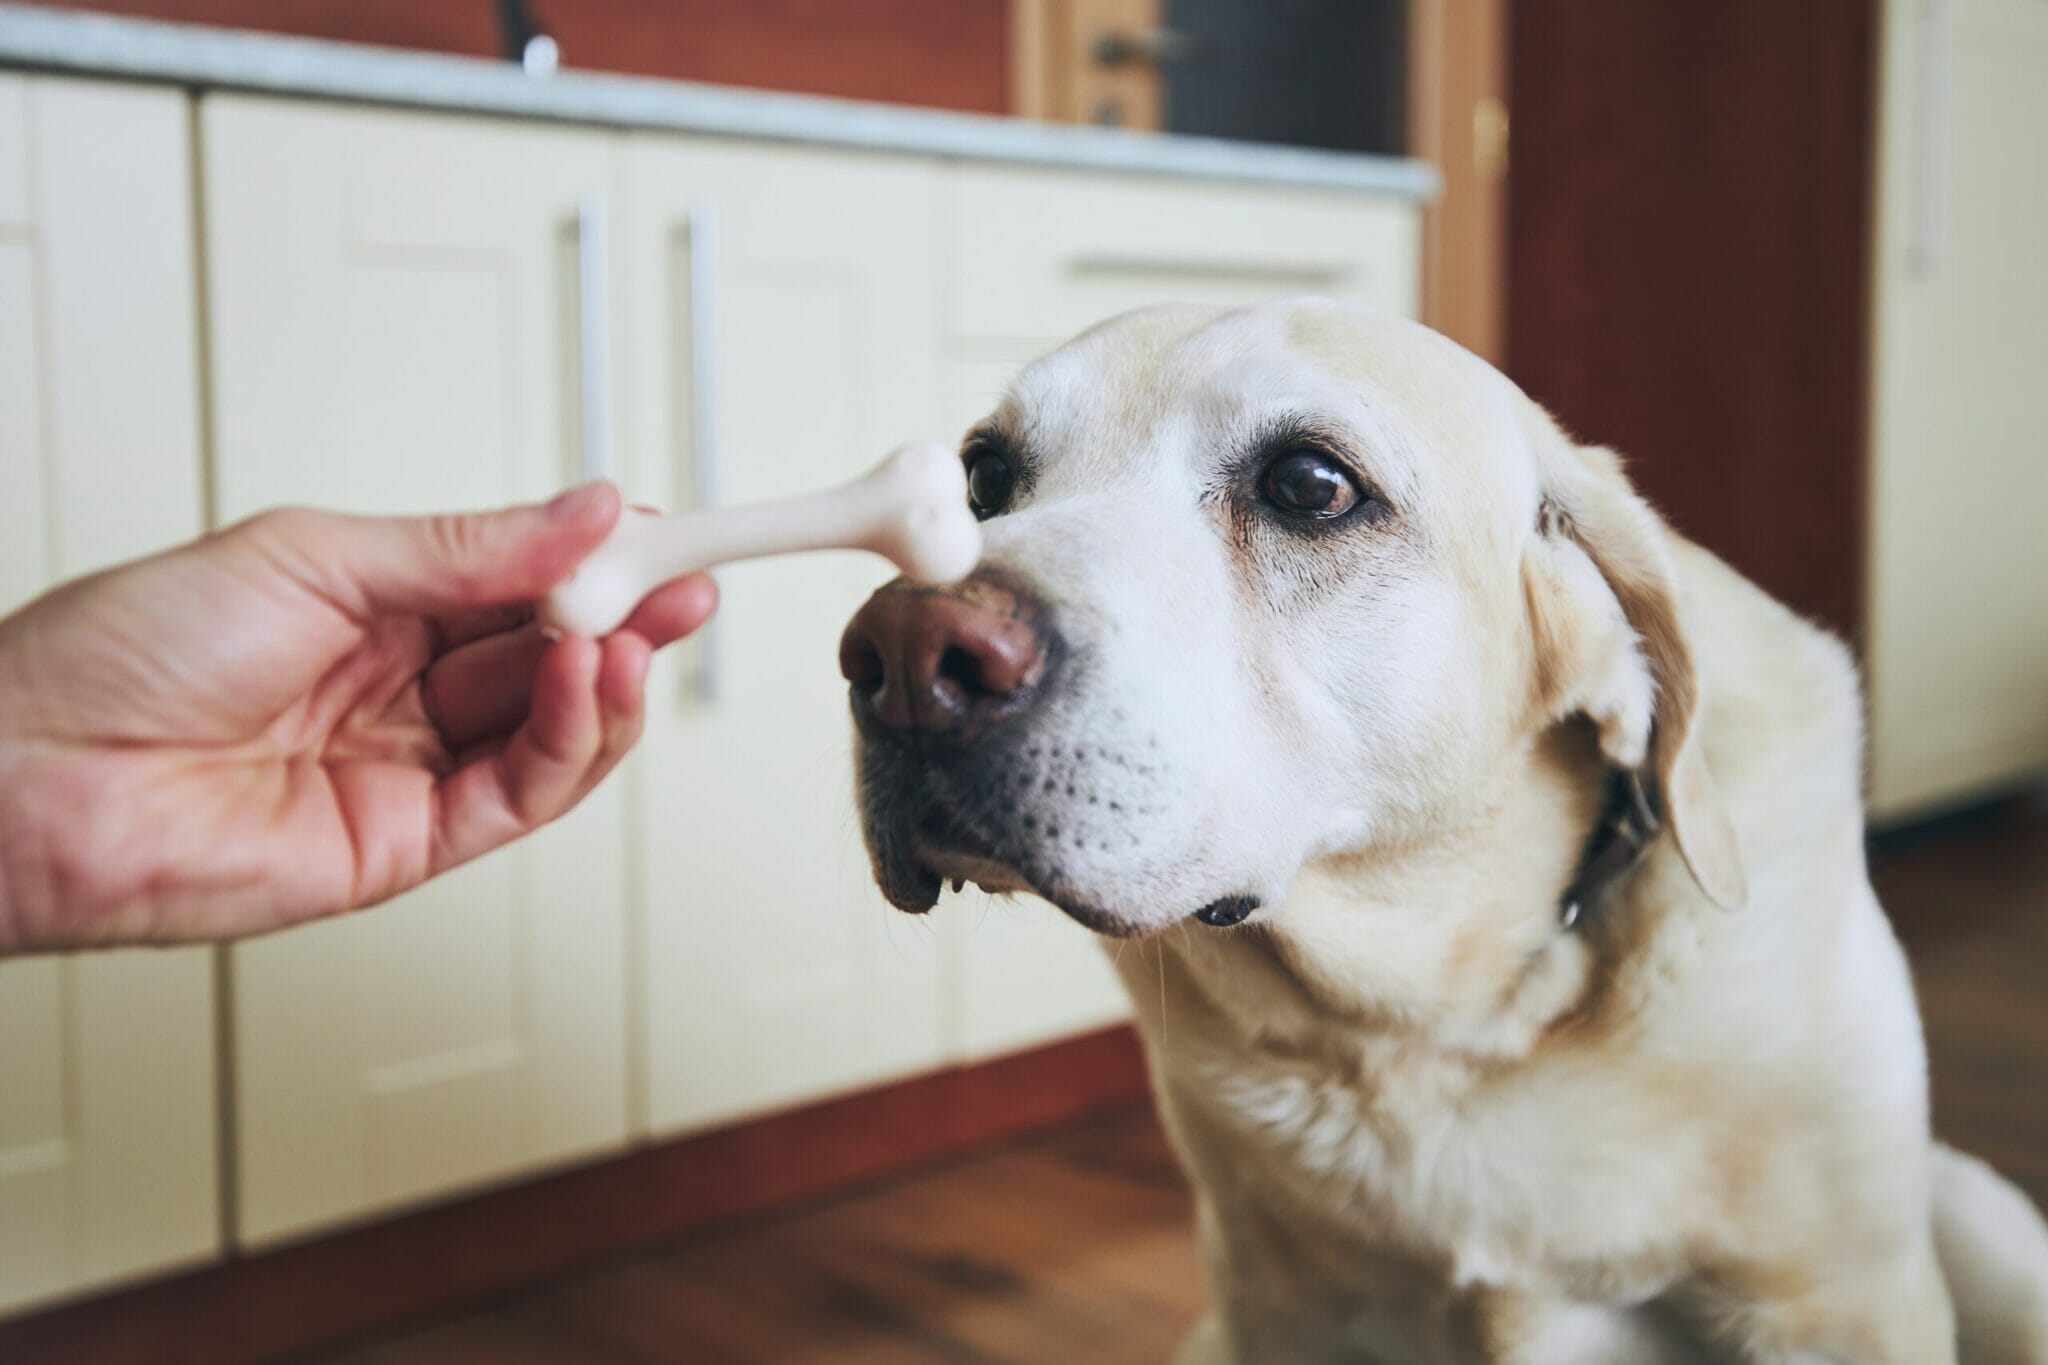 Does Raw Meat Make Dogs Aggressive?